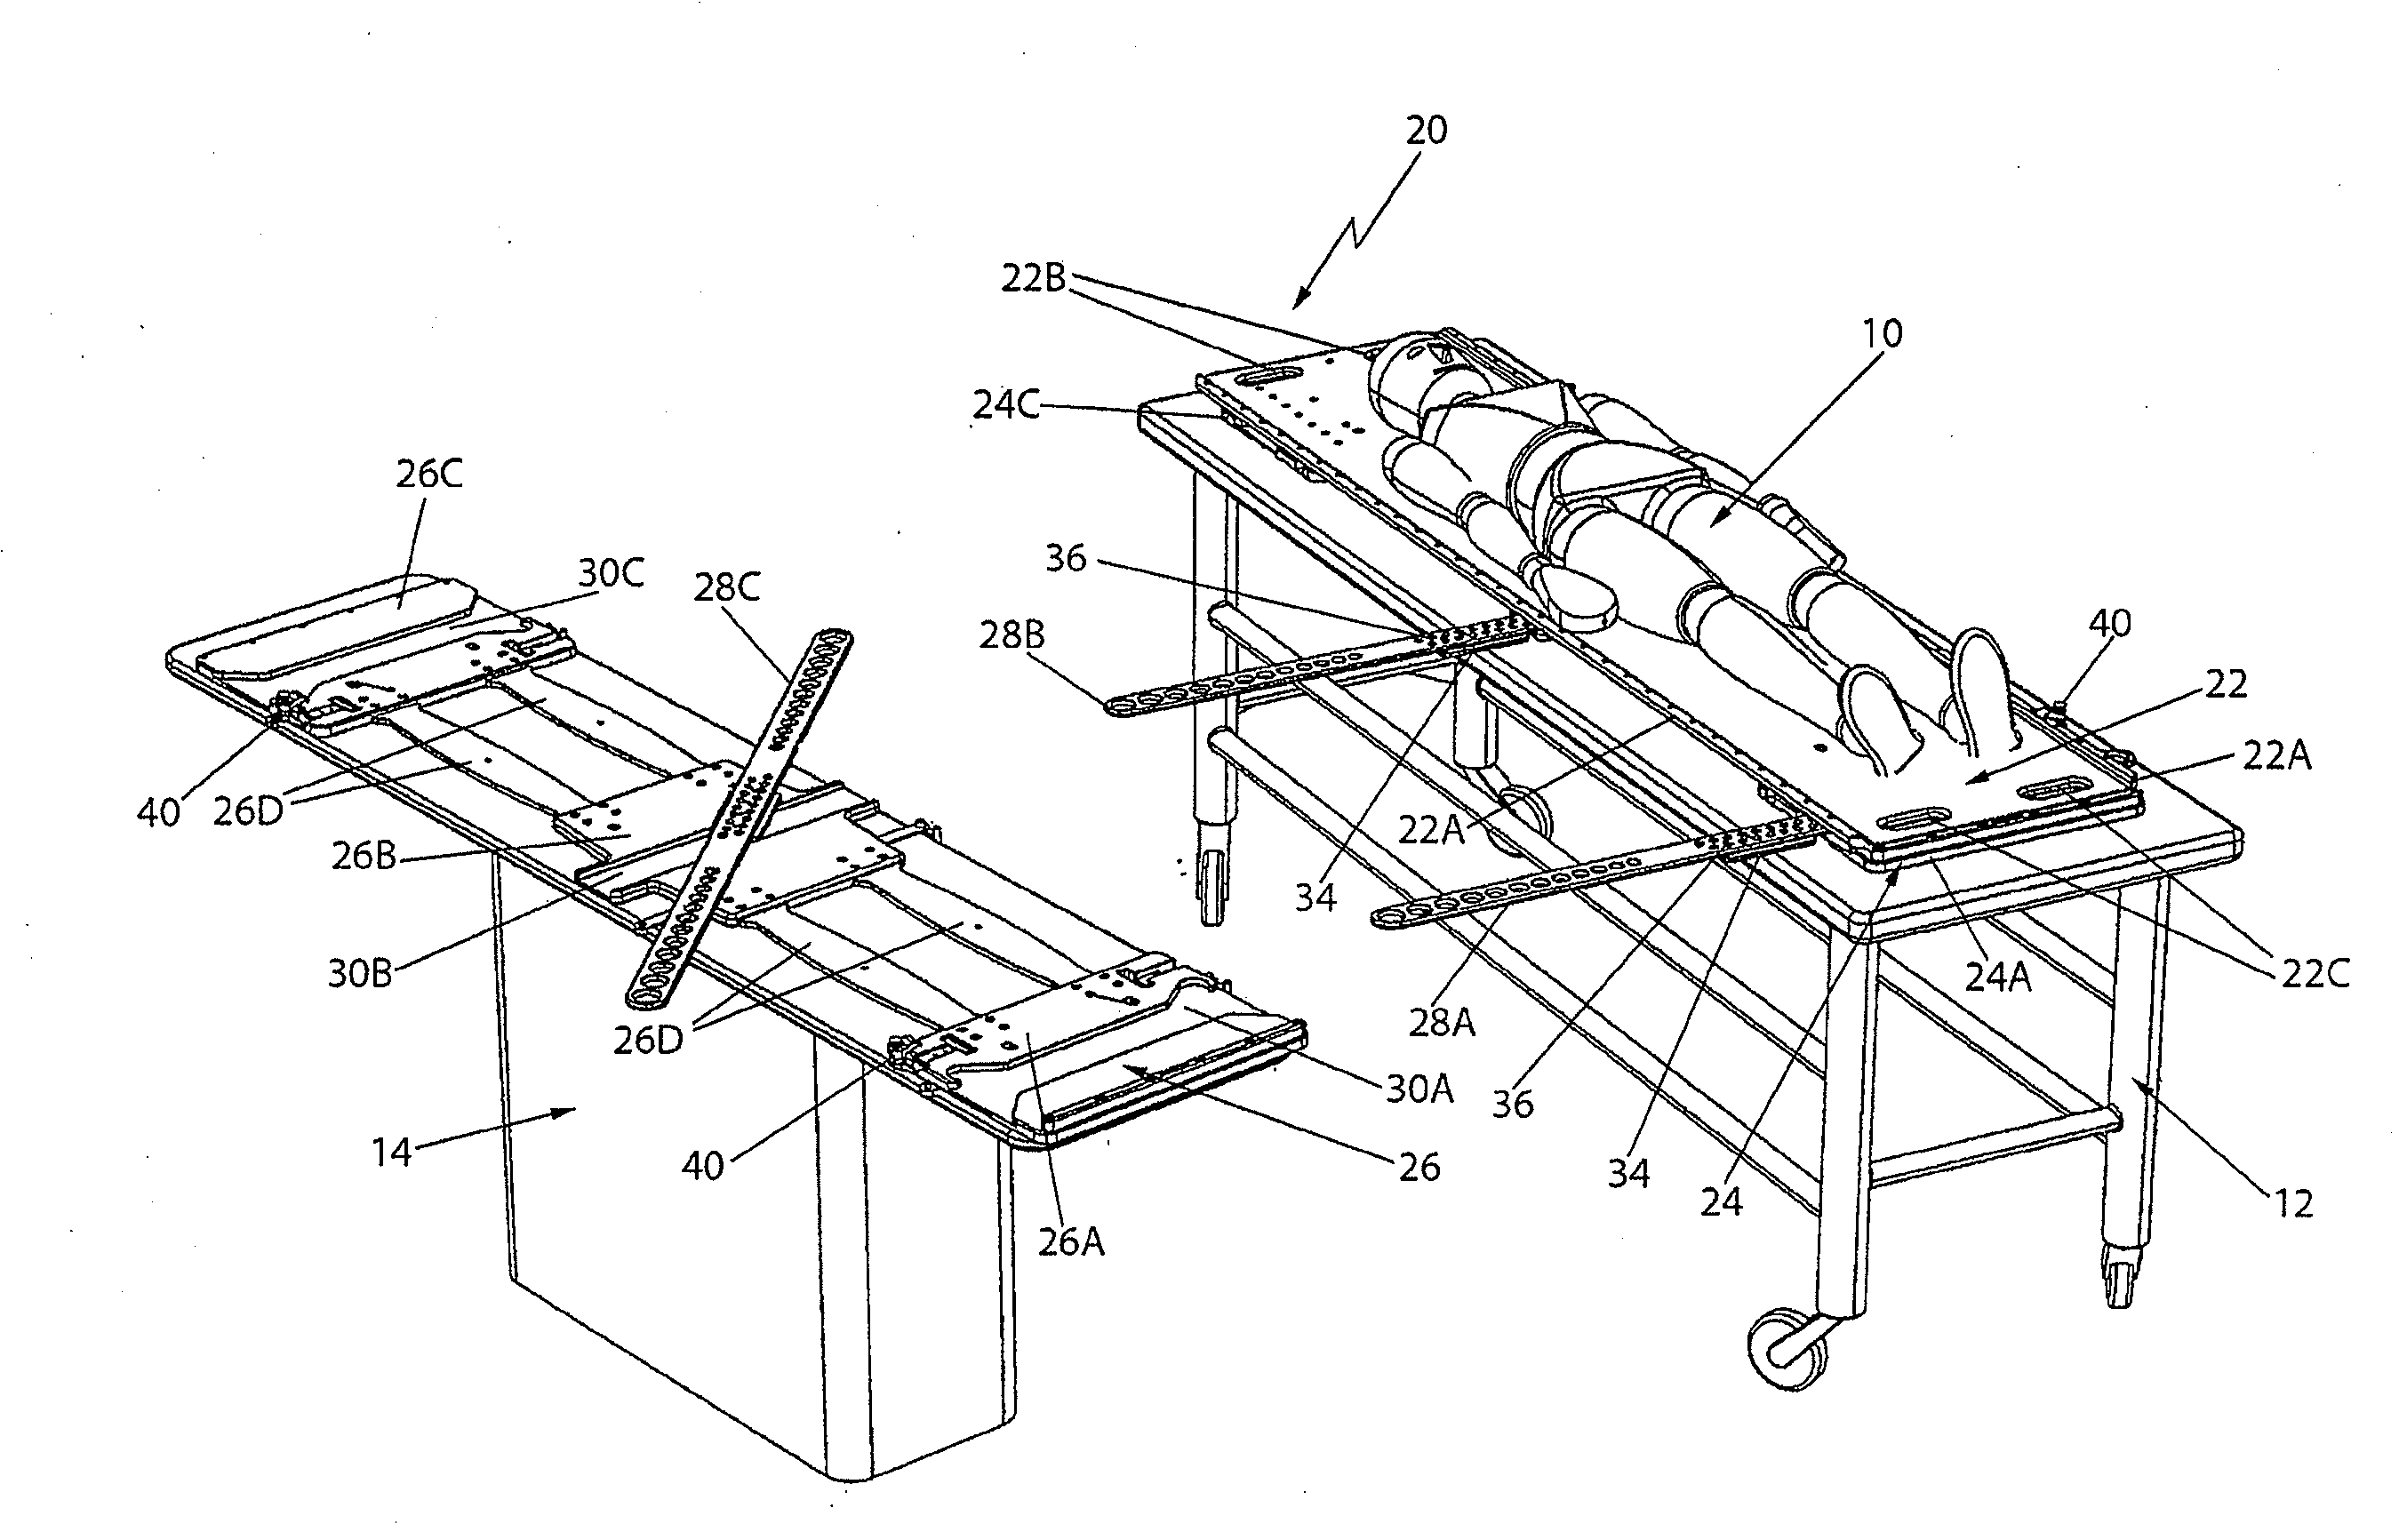 Patient transfer system for use in stereotactic radiation therapy